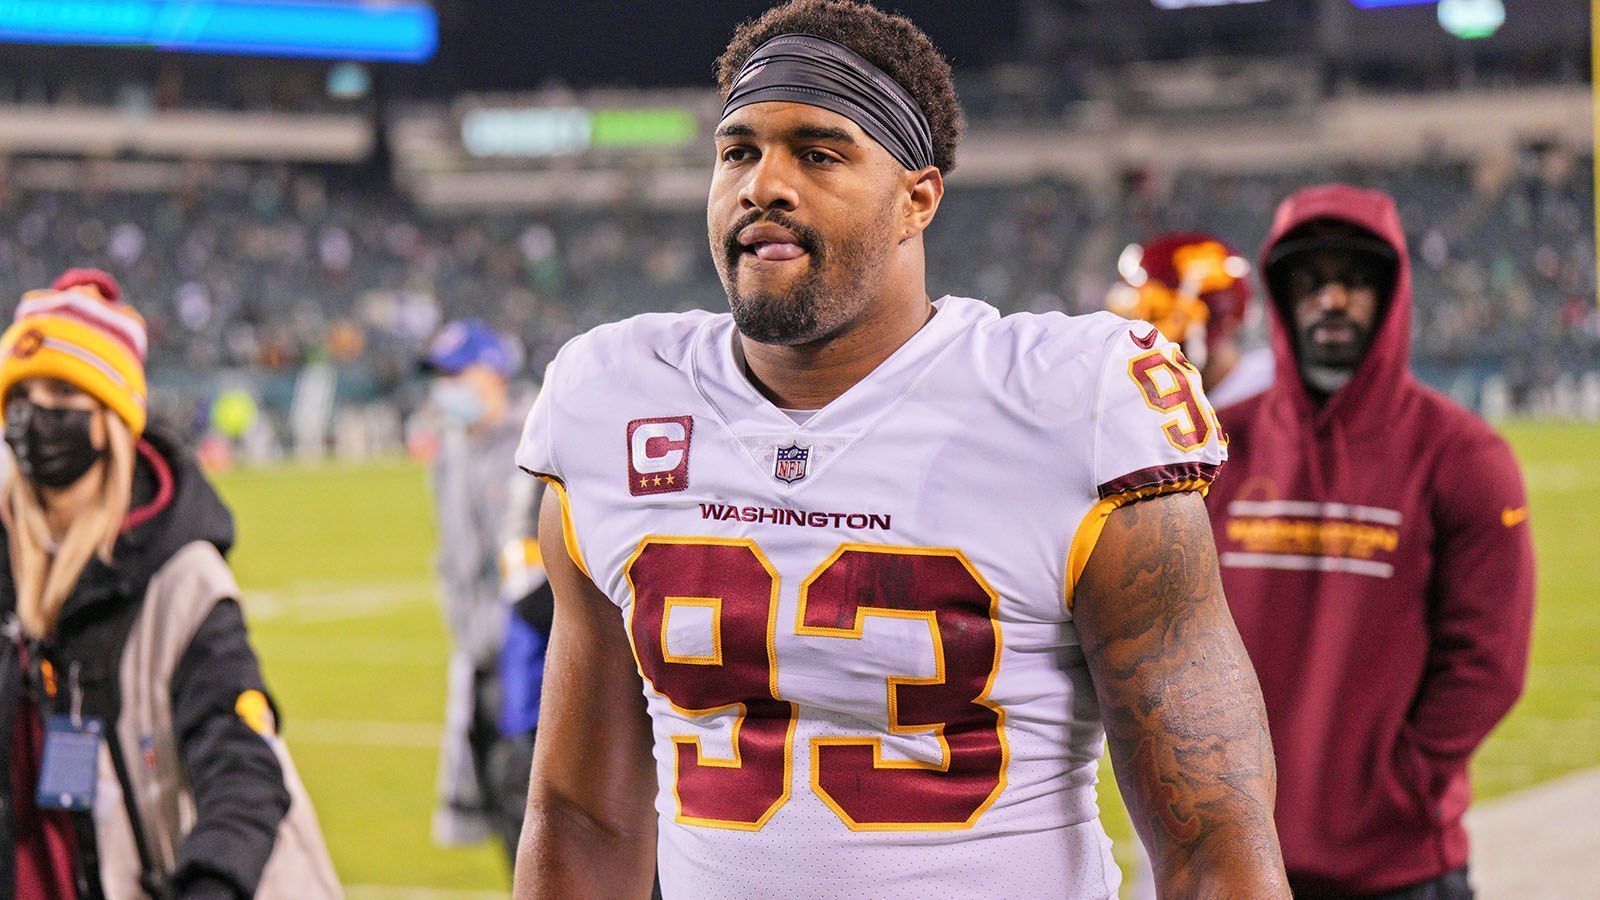 
                <strong>4. Platz: Jonathan Allen </strong><br>
                &#x2022; Team: Washington Commanders<br>&#x2022; Position: Defensive Tackle<br>&#x2022; <strong>Overall Rating: 92</strong><br>&#x2022; Key Stats: Speed: 71 - Strength: 93 - Awareness: 97<br>
              